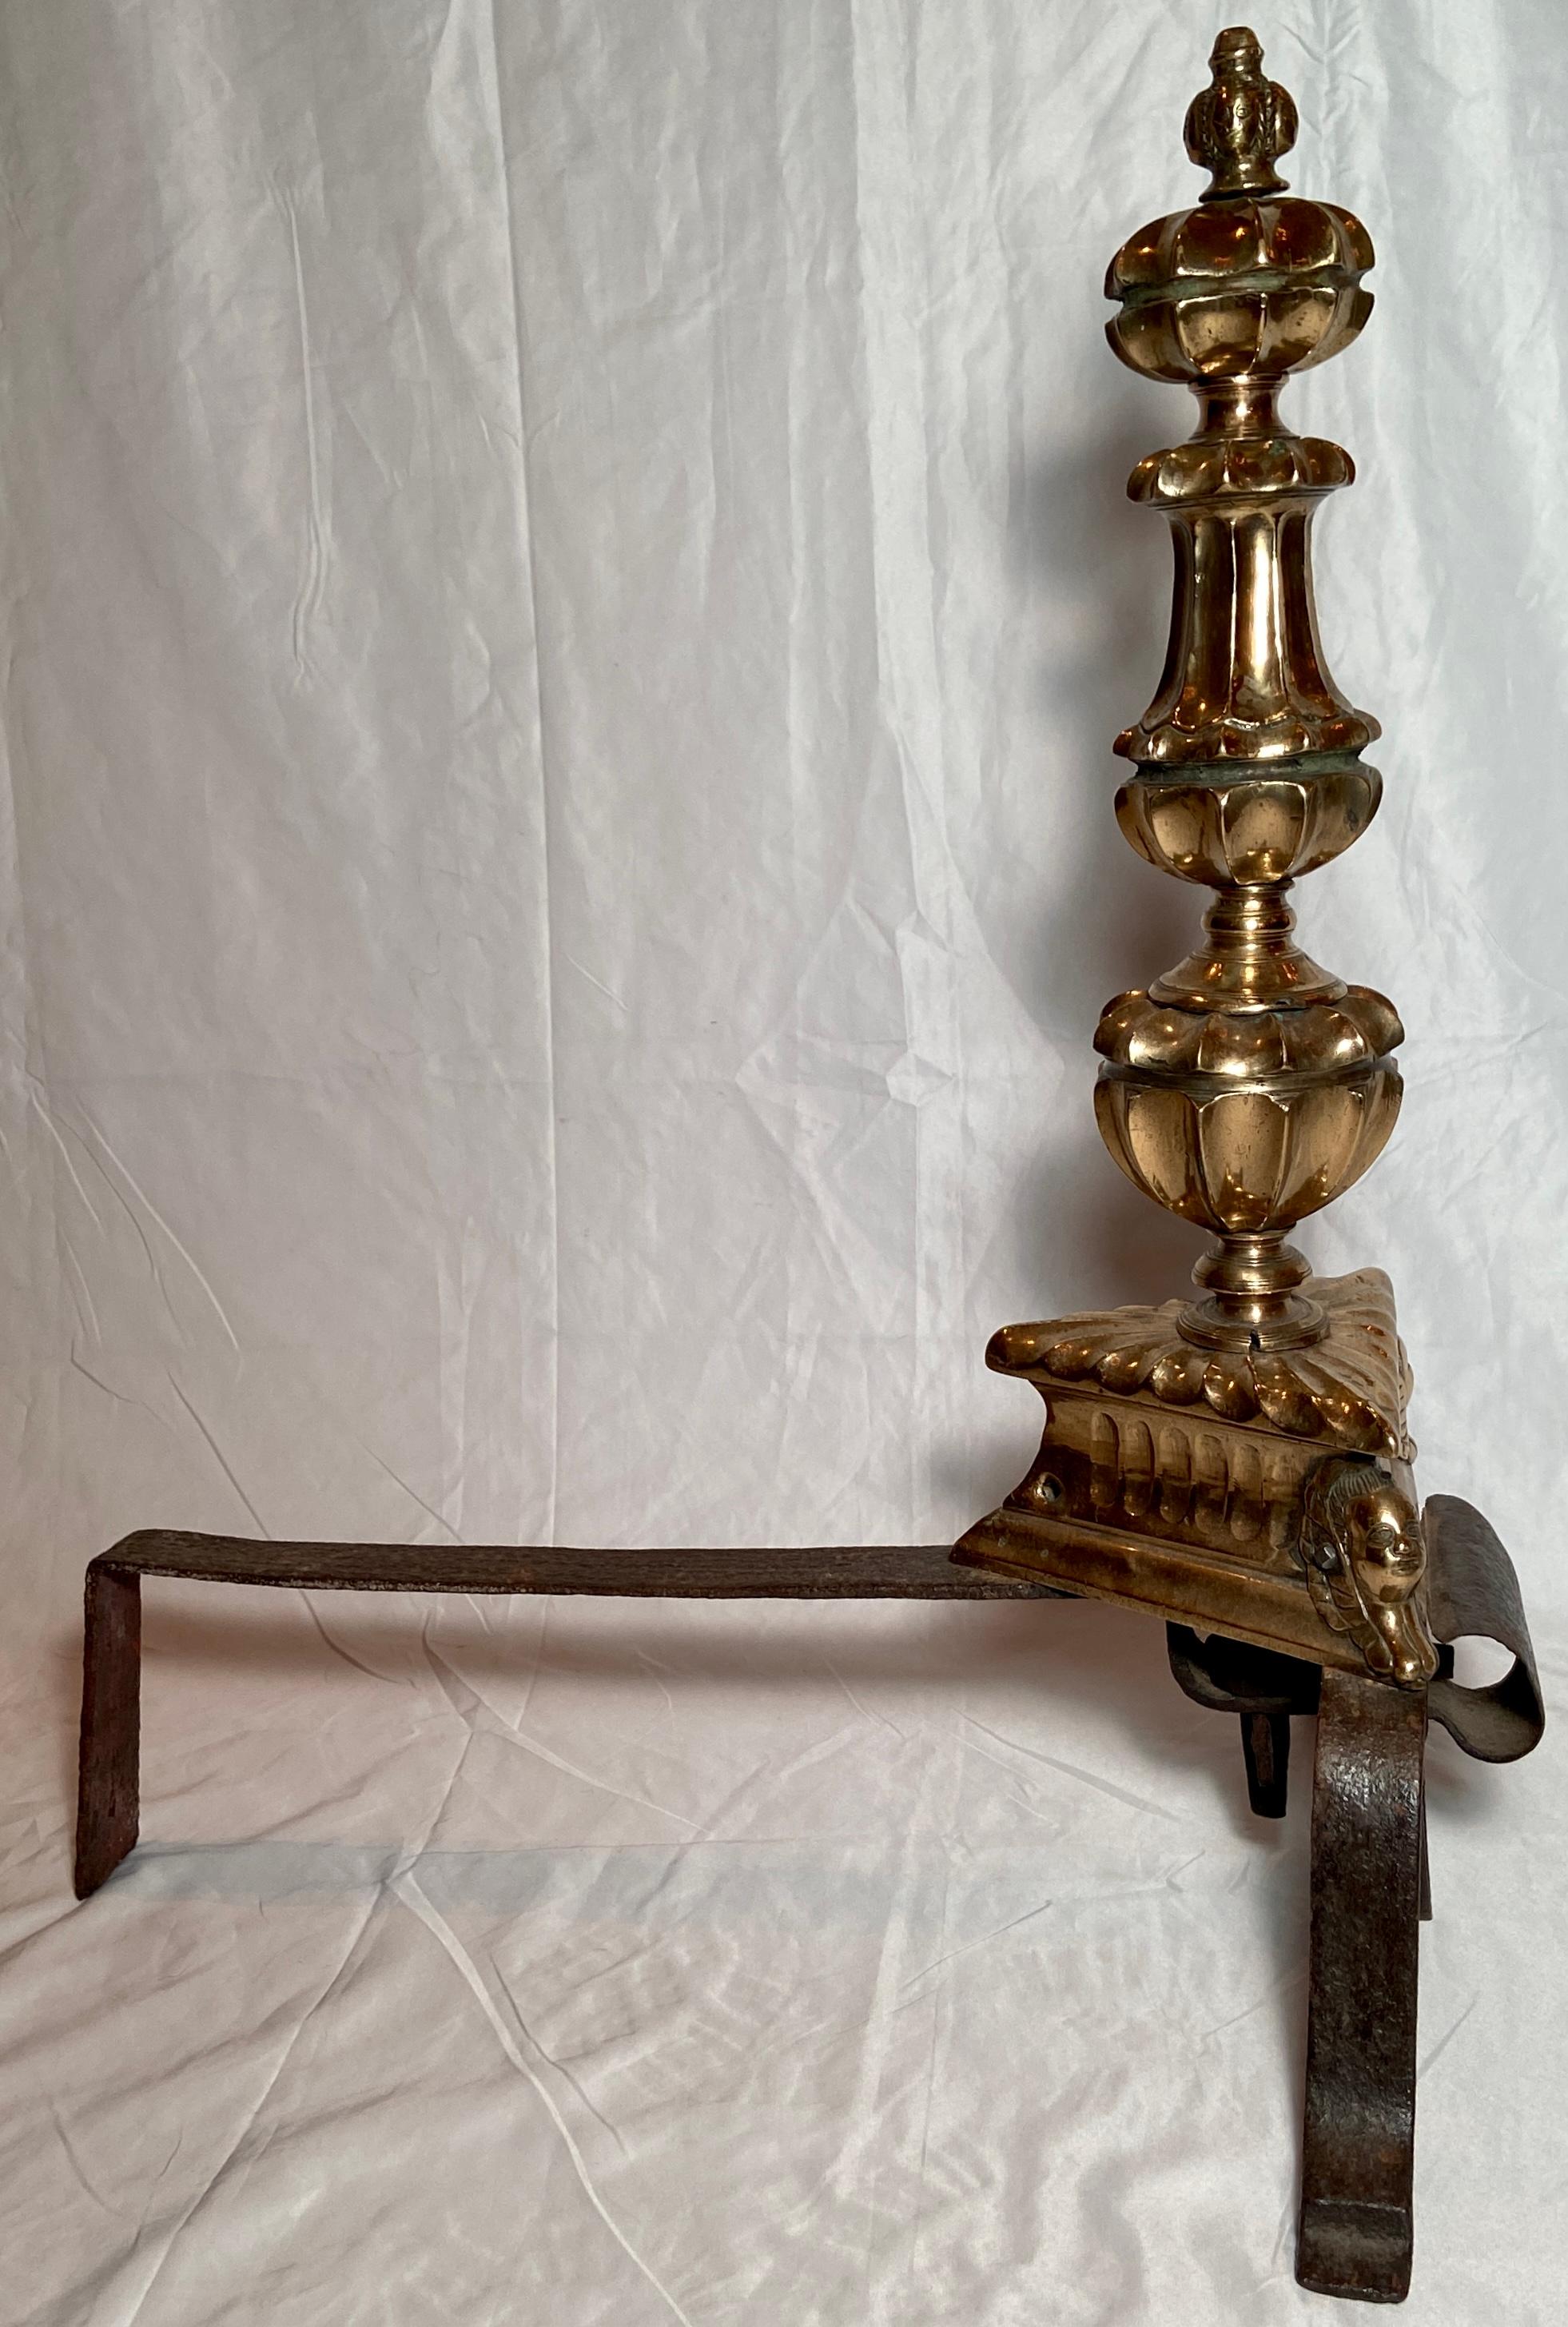 Antique 17th Century Brass and Iron Andirons In Good Condition For Sale In New Orleans, LA